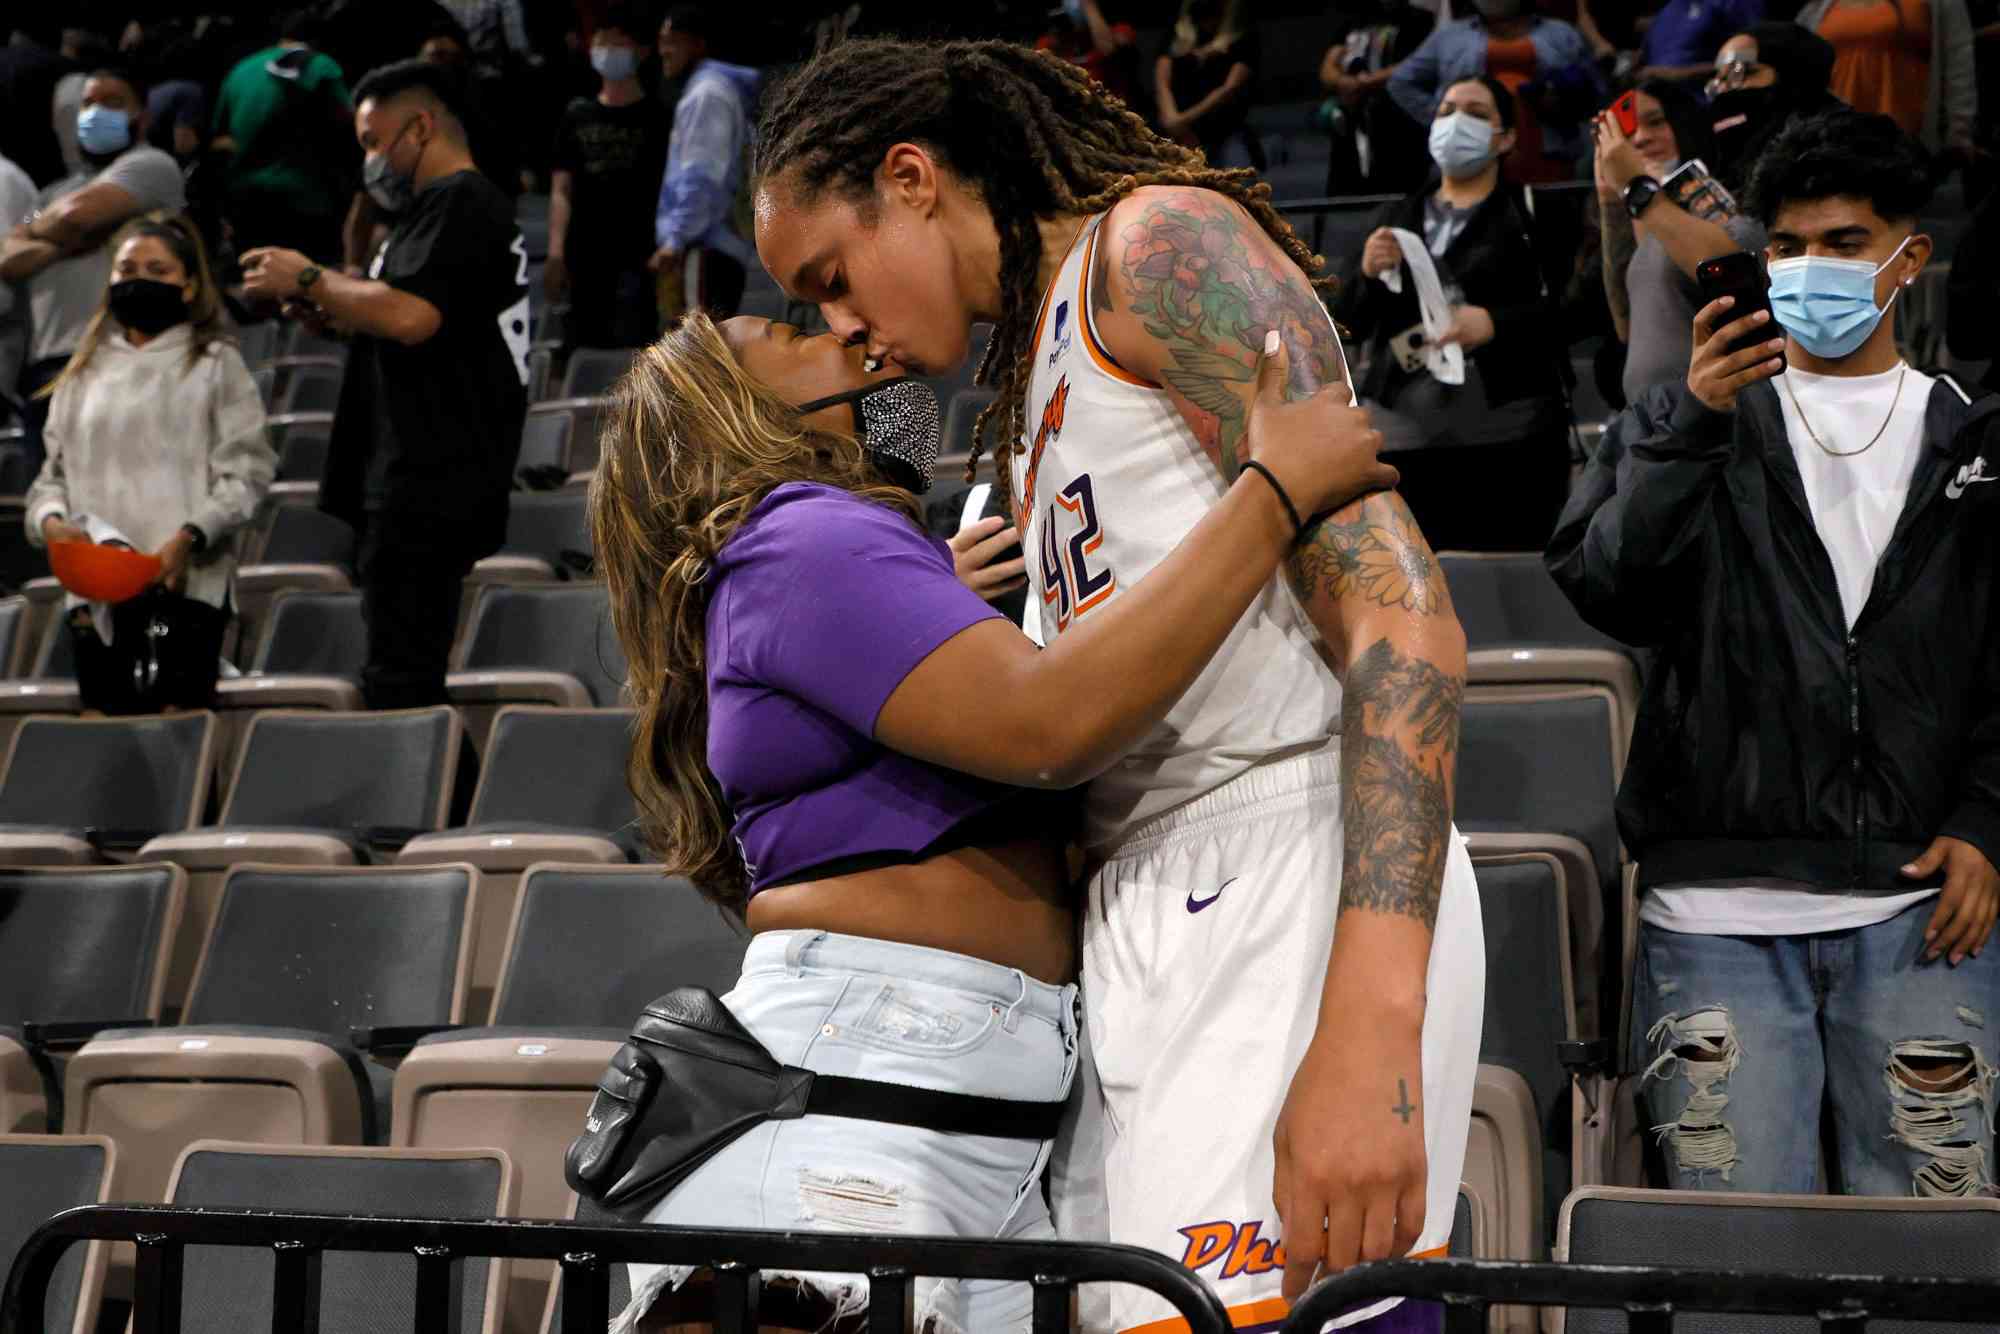 LAS VEGAS, NEVADA - OCTOBER 08: Brittney Griner #42 of the Phoenix Mercury kisses her wife Cherelle Griner in the stands after the Mercury defeated the Las Vegas Aces 87-84 in Game Five of the 2021 WNBA Playoffs semifinals to win the series at Michelob ULTRA Arena on October 8, 2021 in Las Vegas, Nevada. NOTE TO USER: User expressly acknowledges and agrees that, by downloading and or using this photograph, User is consenting to the terms and conditions of the Getty Images License Agreement. (Photo by Ethan Miller/Getty Images)